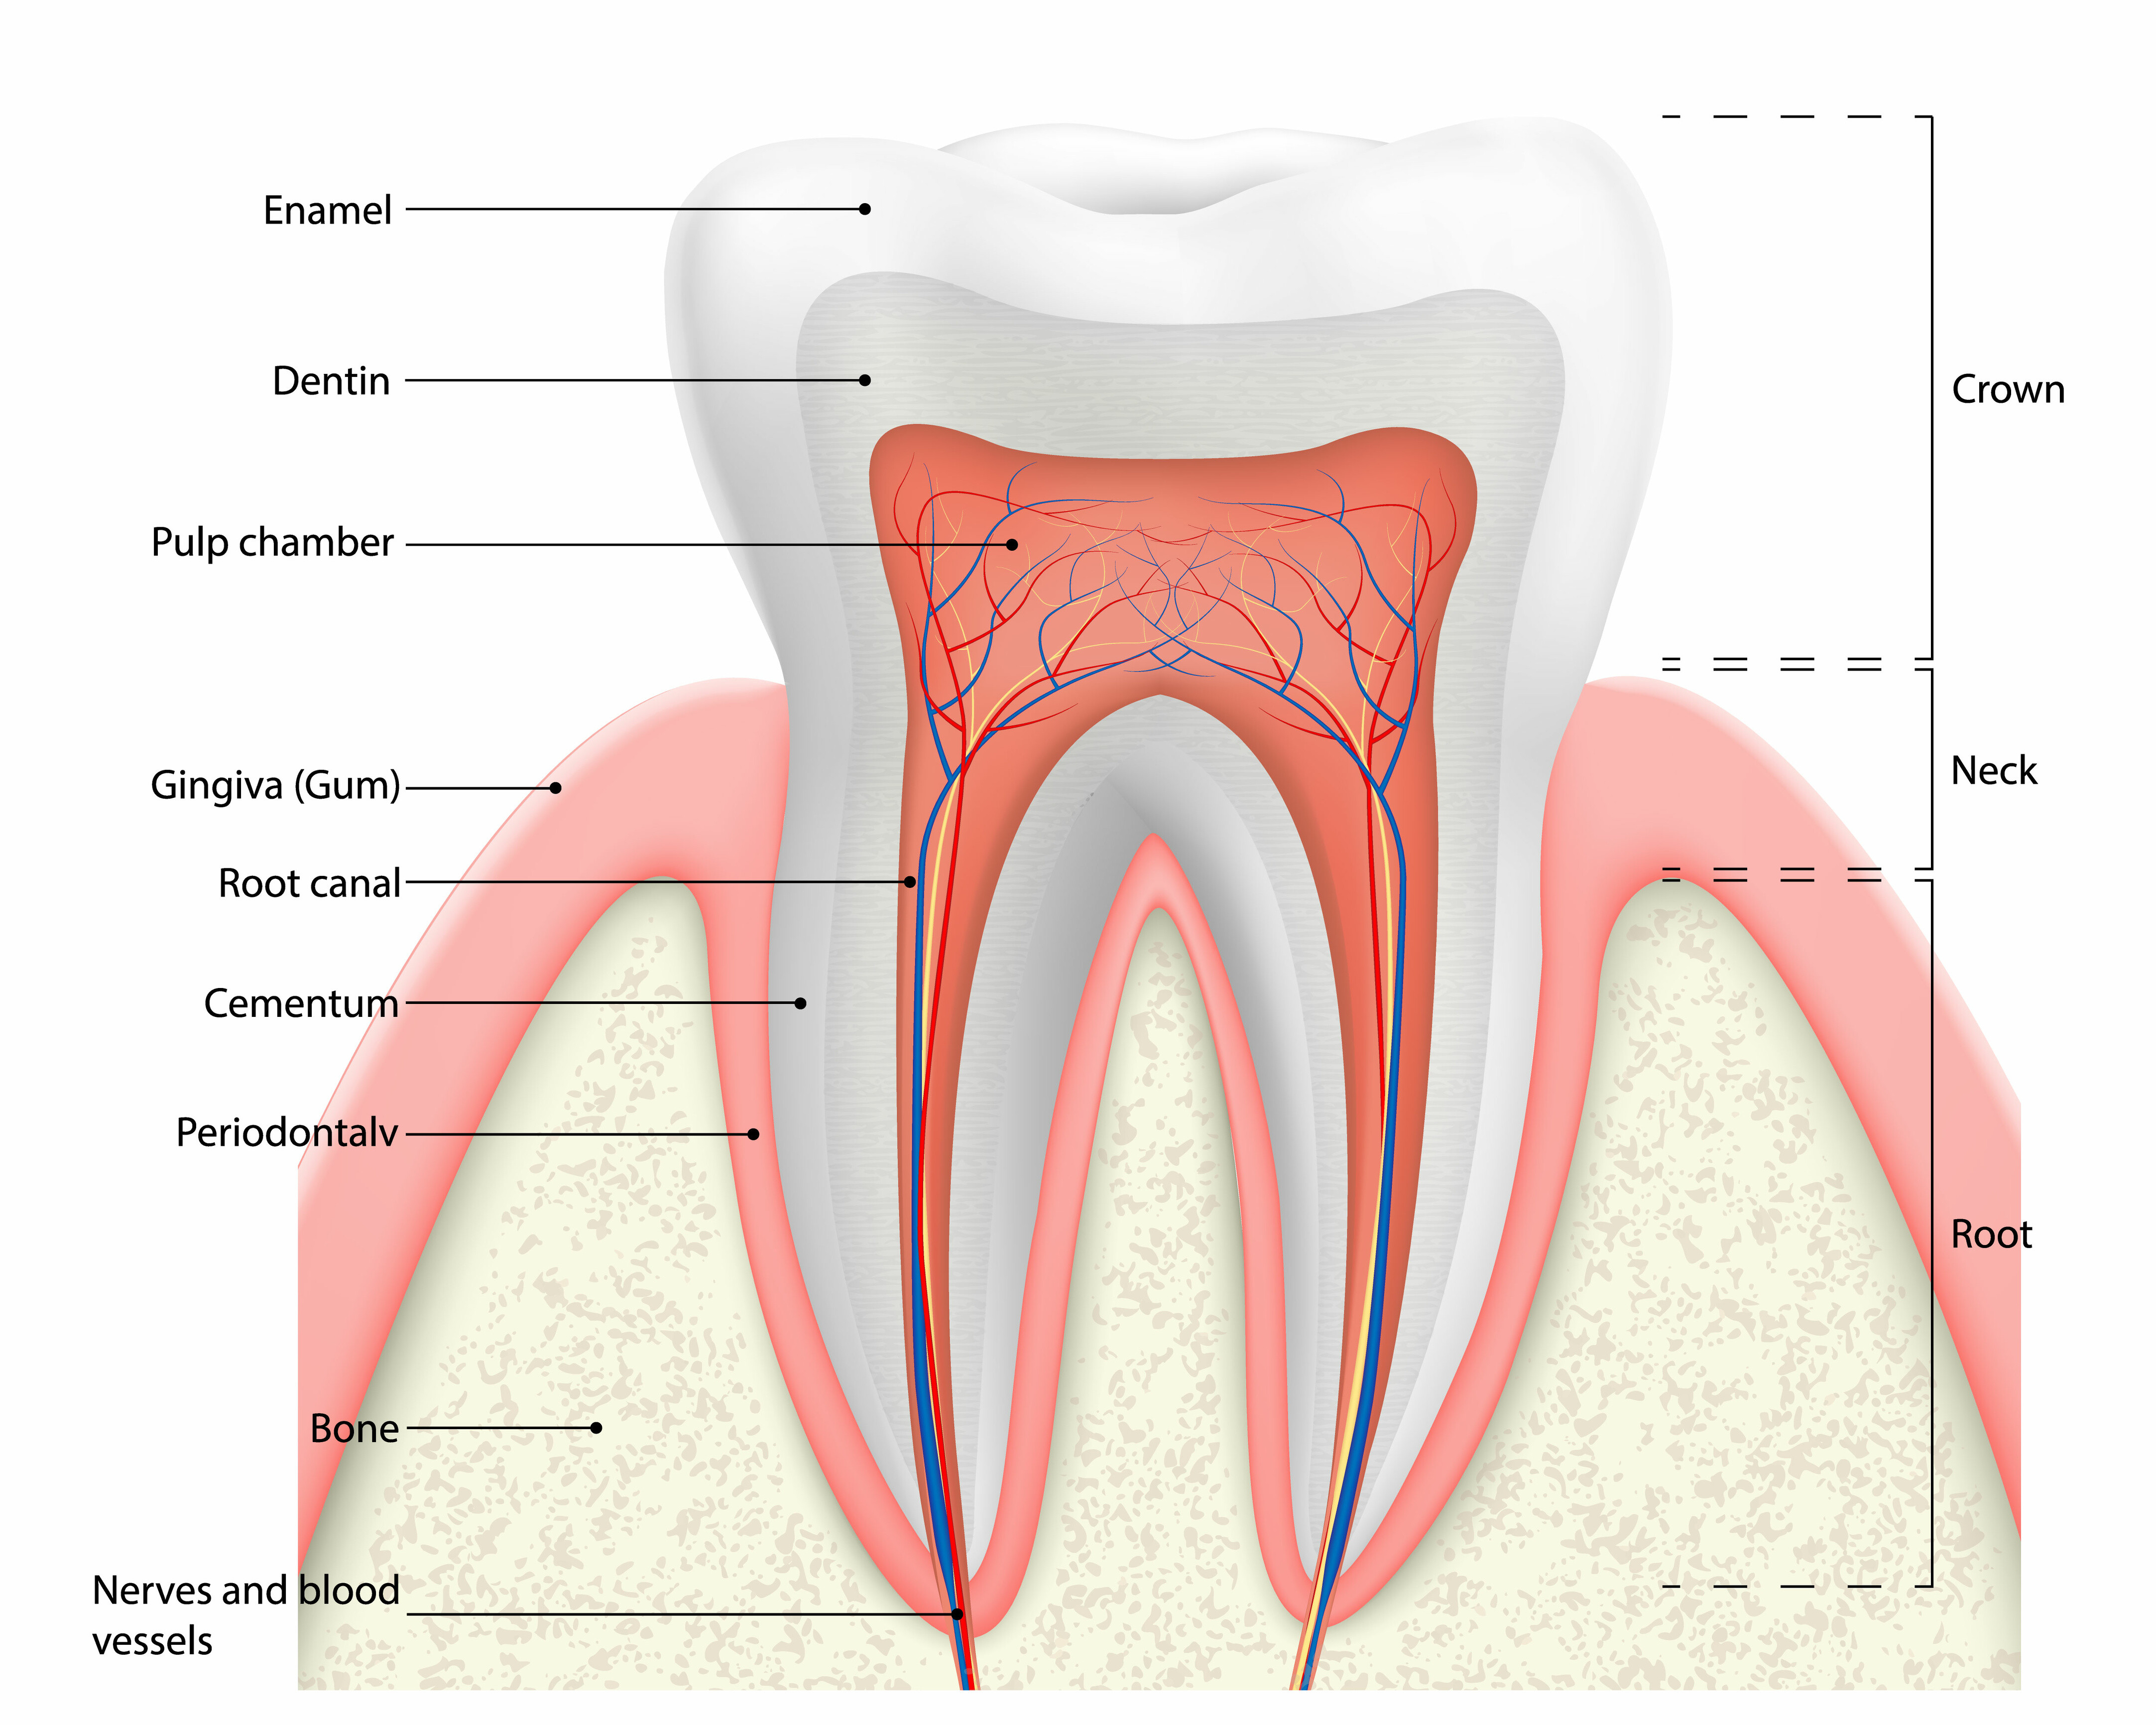 Human tooth structure vector diagram. The anatomy of the tooth. Cross section scheme representing tooth layers enamel, dentine, pulp with blood vessels and nerves, cementum and structures around it.